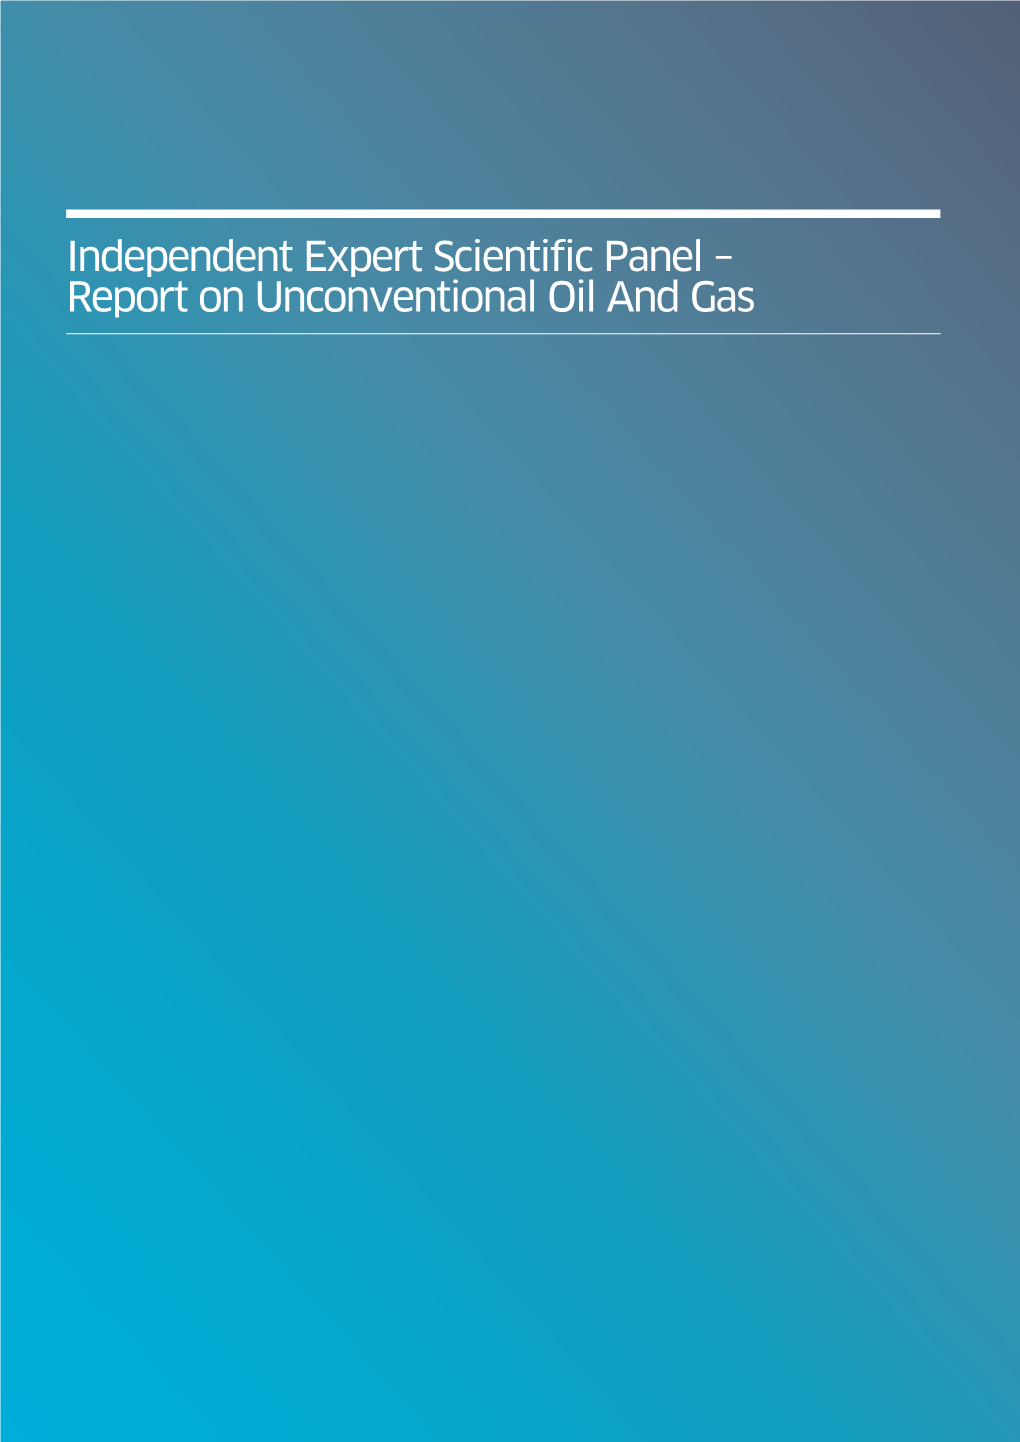 Report on Unconventional Oil and Gas Independent Expert Scientific Panel – Report on Unconventional Oil and Gas